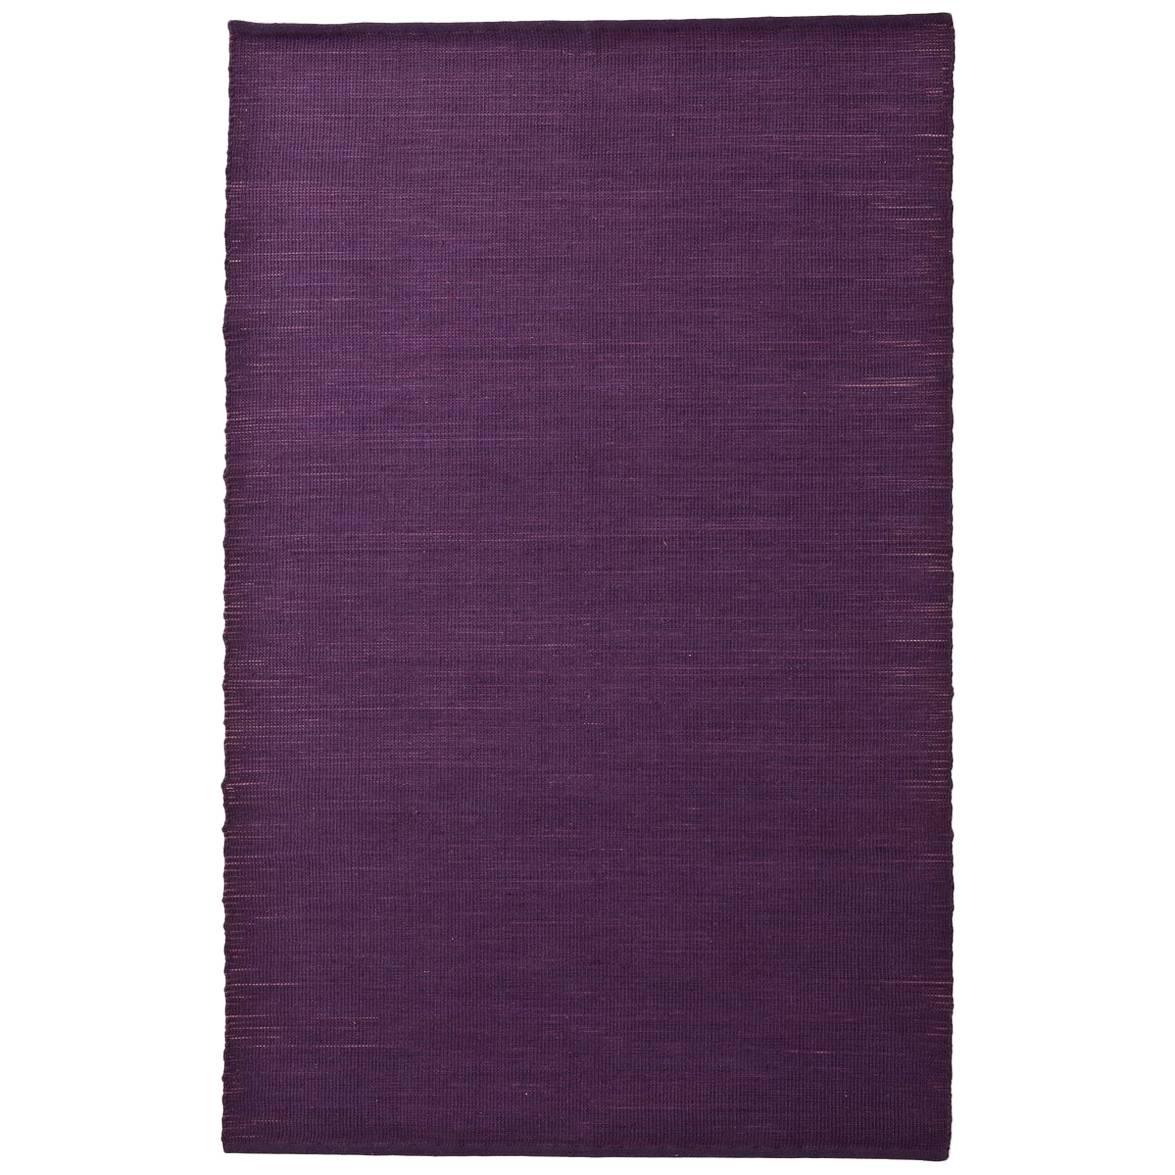 Tatami  Purple Wool and Jute Rug by Nani Marquina & Ariadna Miquel, Small